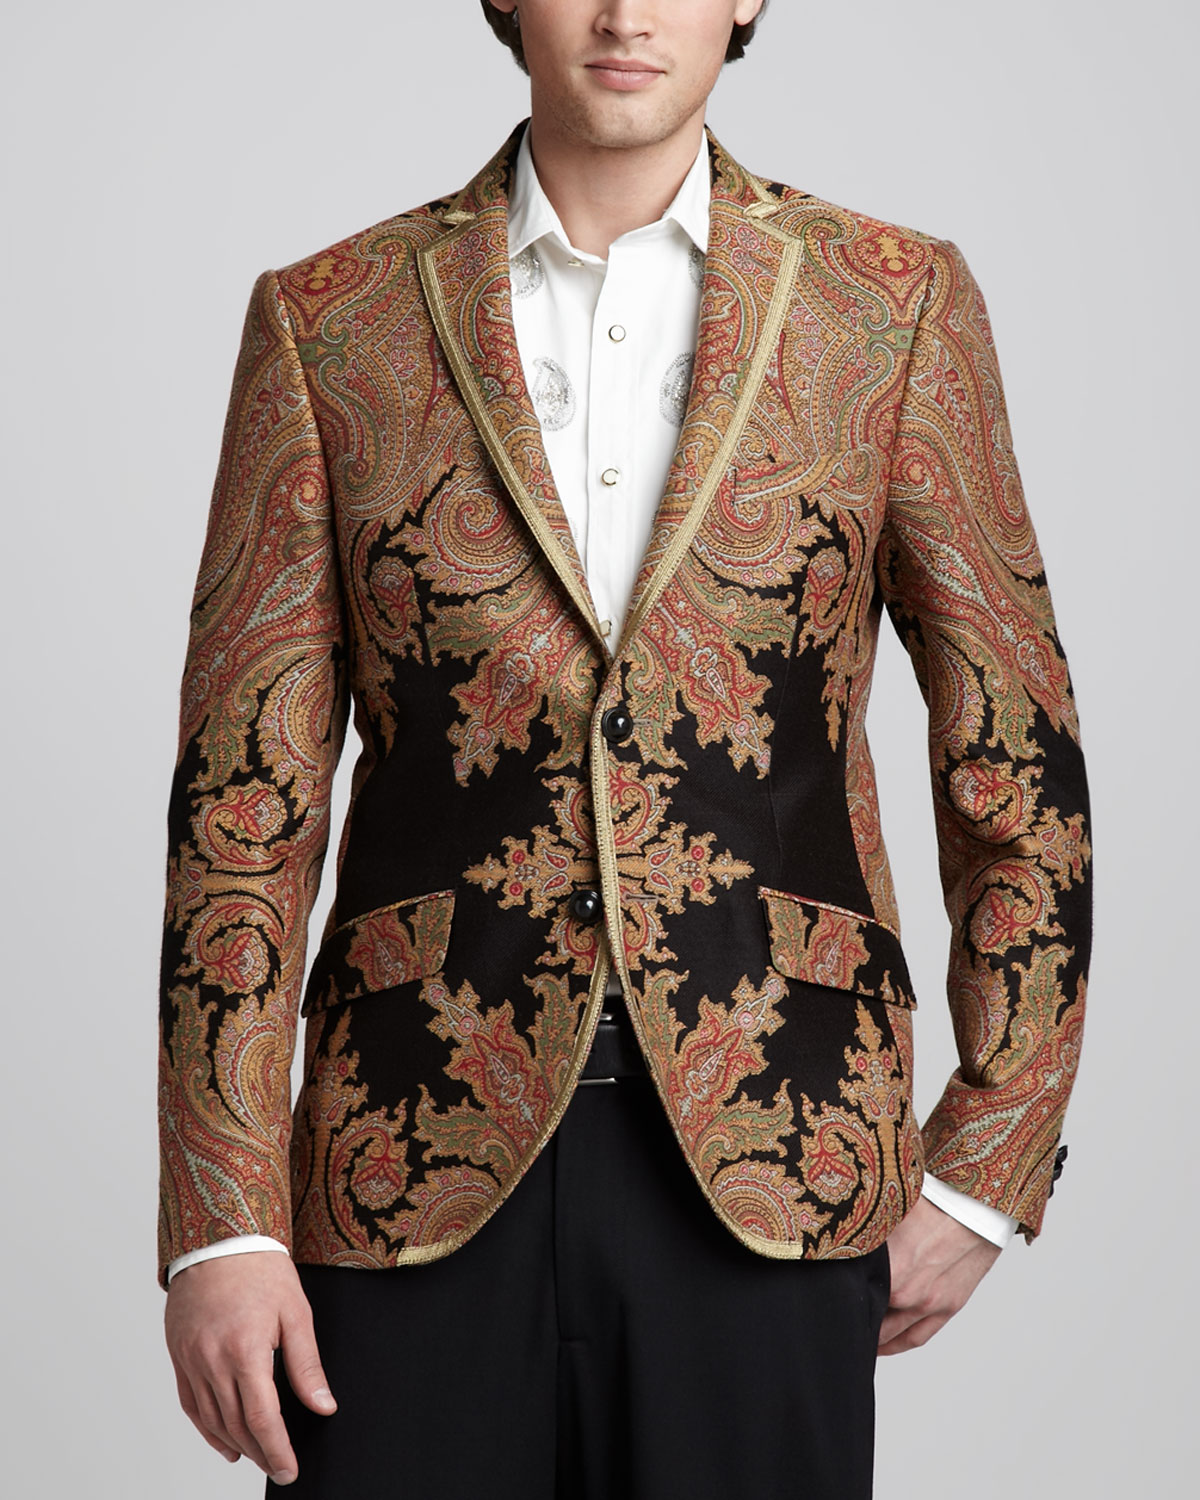 Lyst - Etro Paisley Evening Jacket in Black for Men